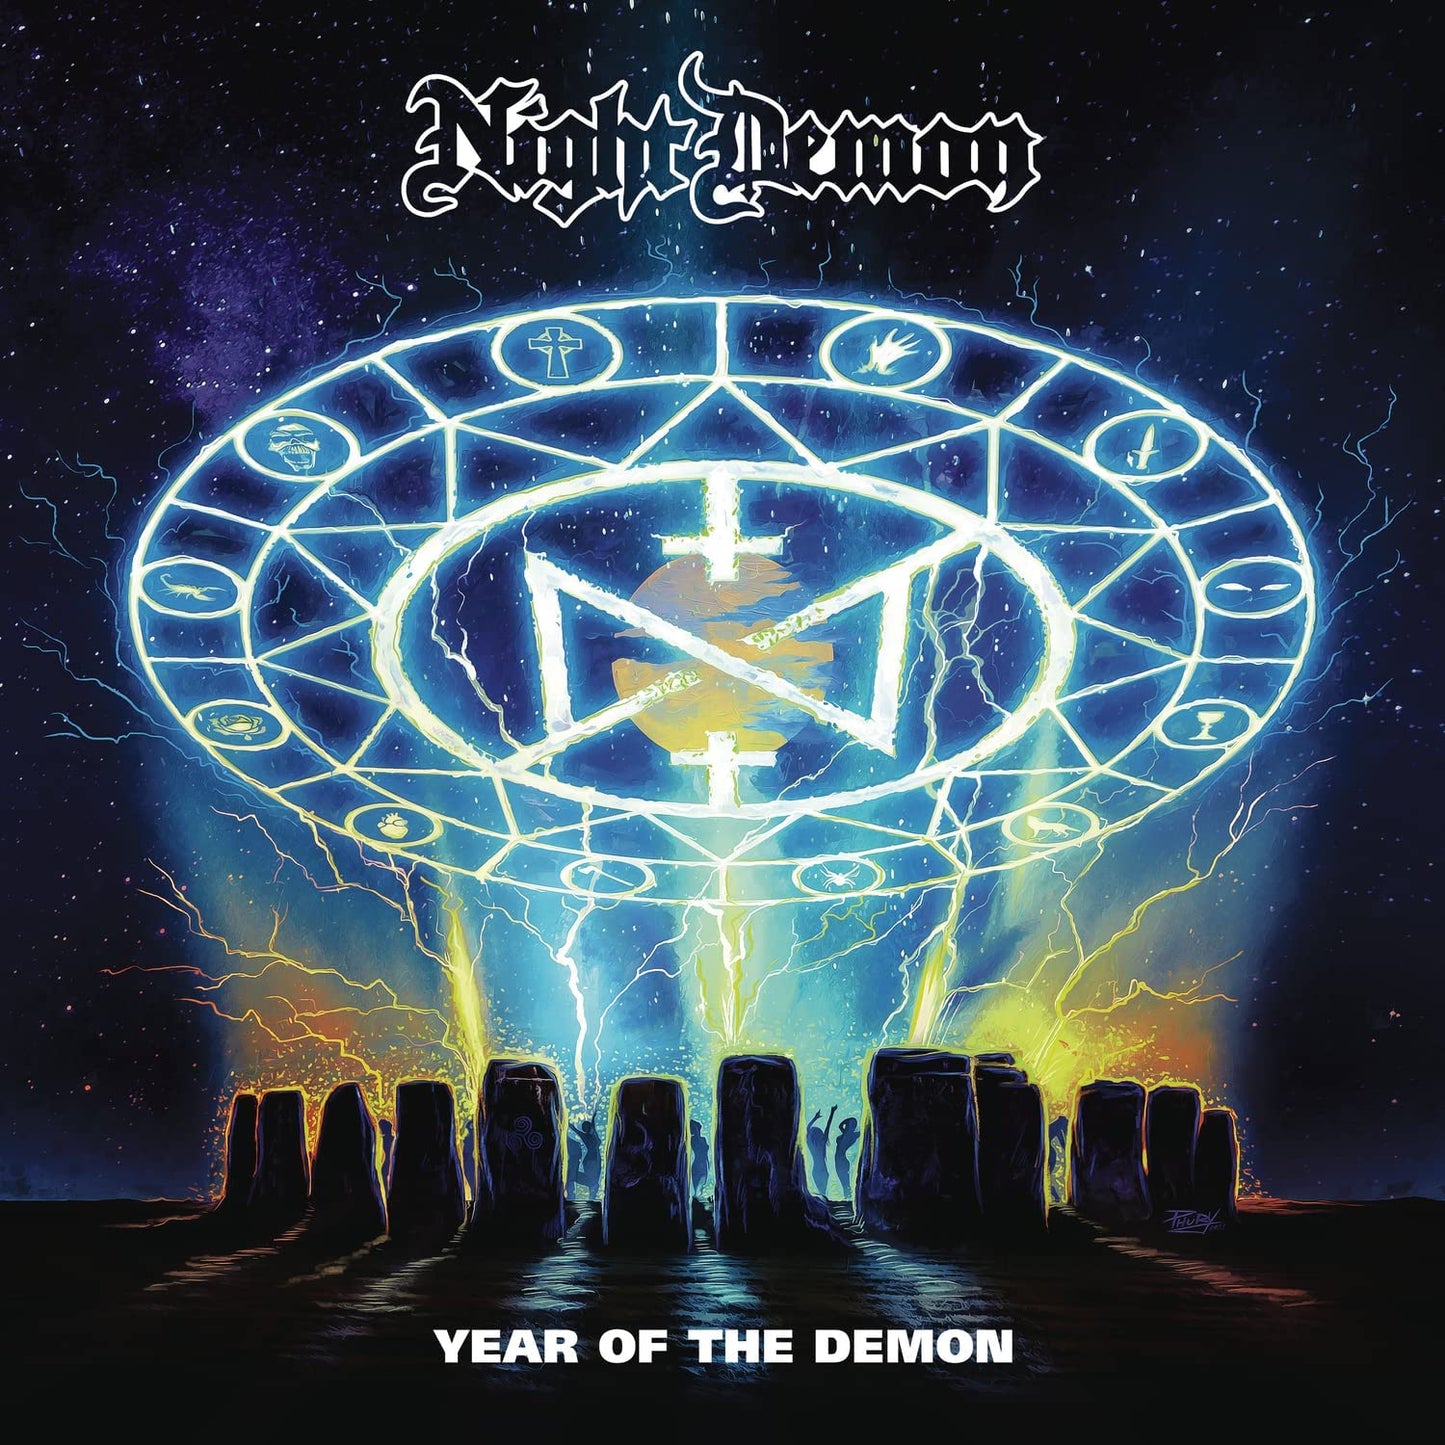 Night Demon The Year of the Demon